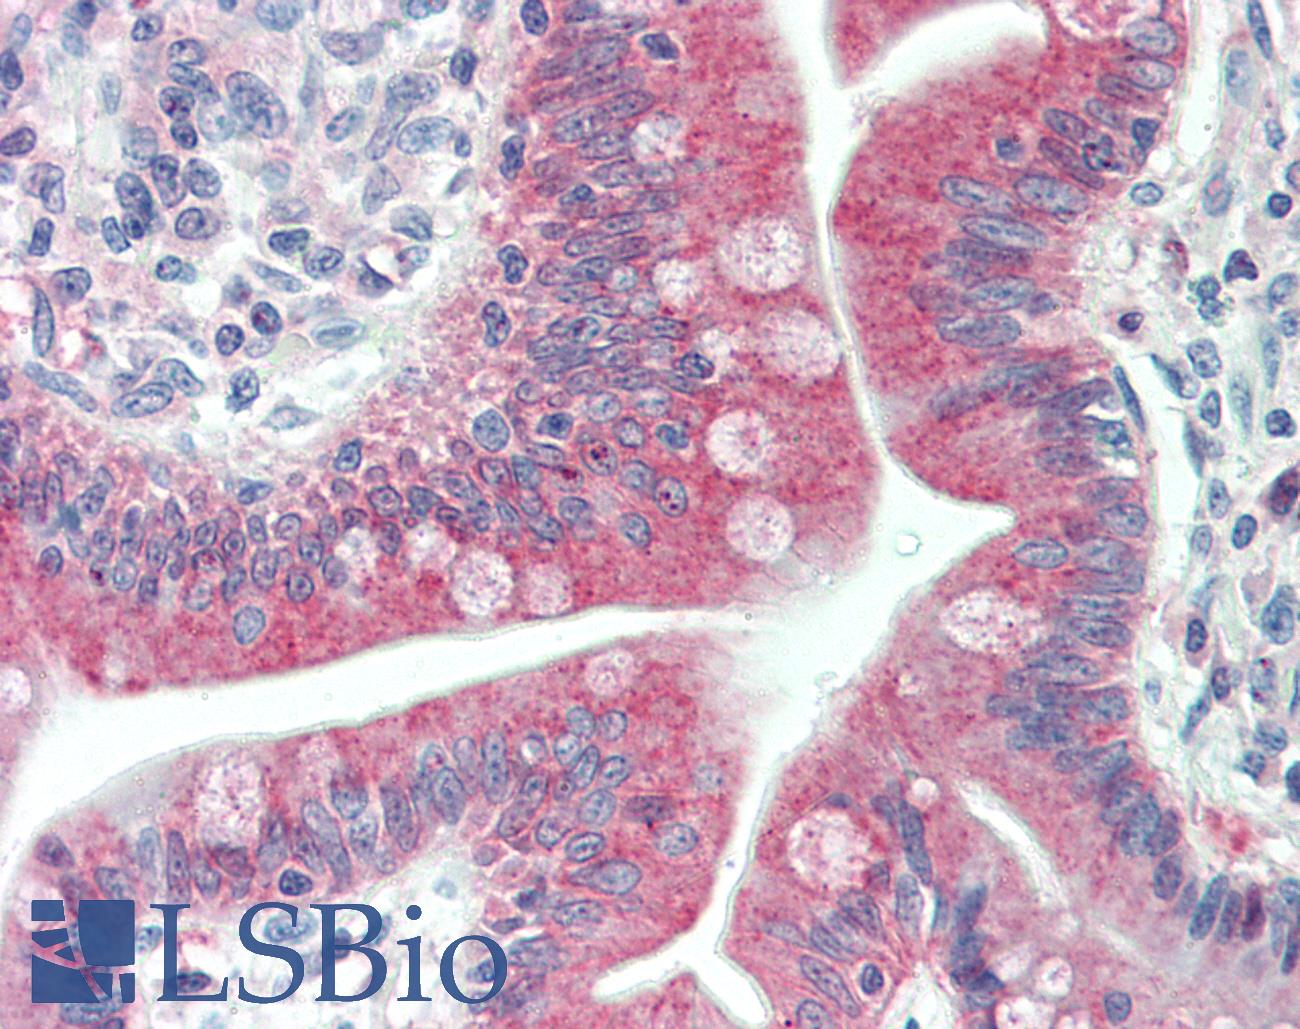 MAP1LC3C / LC3C Antibody - Anti-MAP1LC3C / LC3C antibody IHC staining of human small intestine. Immunohistochemistry of formalin-fixed, paraffin-embedded tissue after heat-induced antigen retrieval. Antibody dilution 1:100.